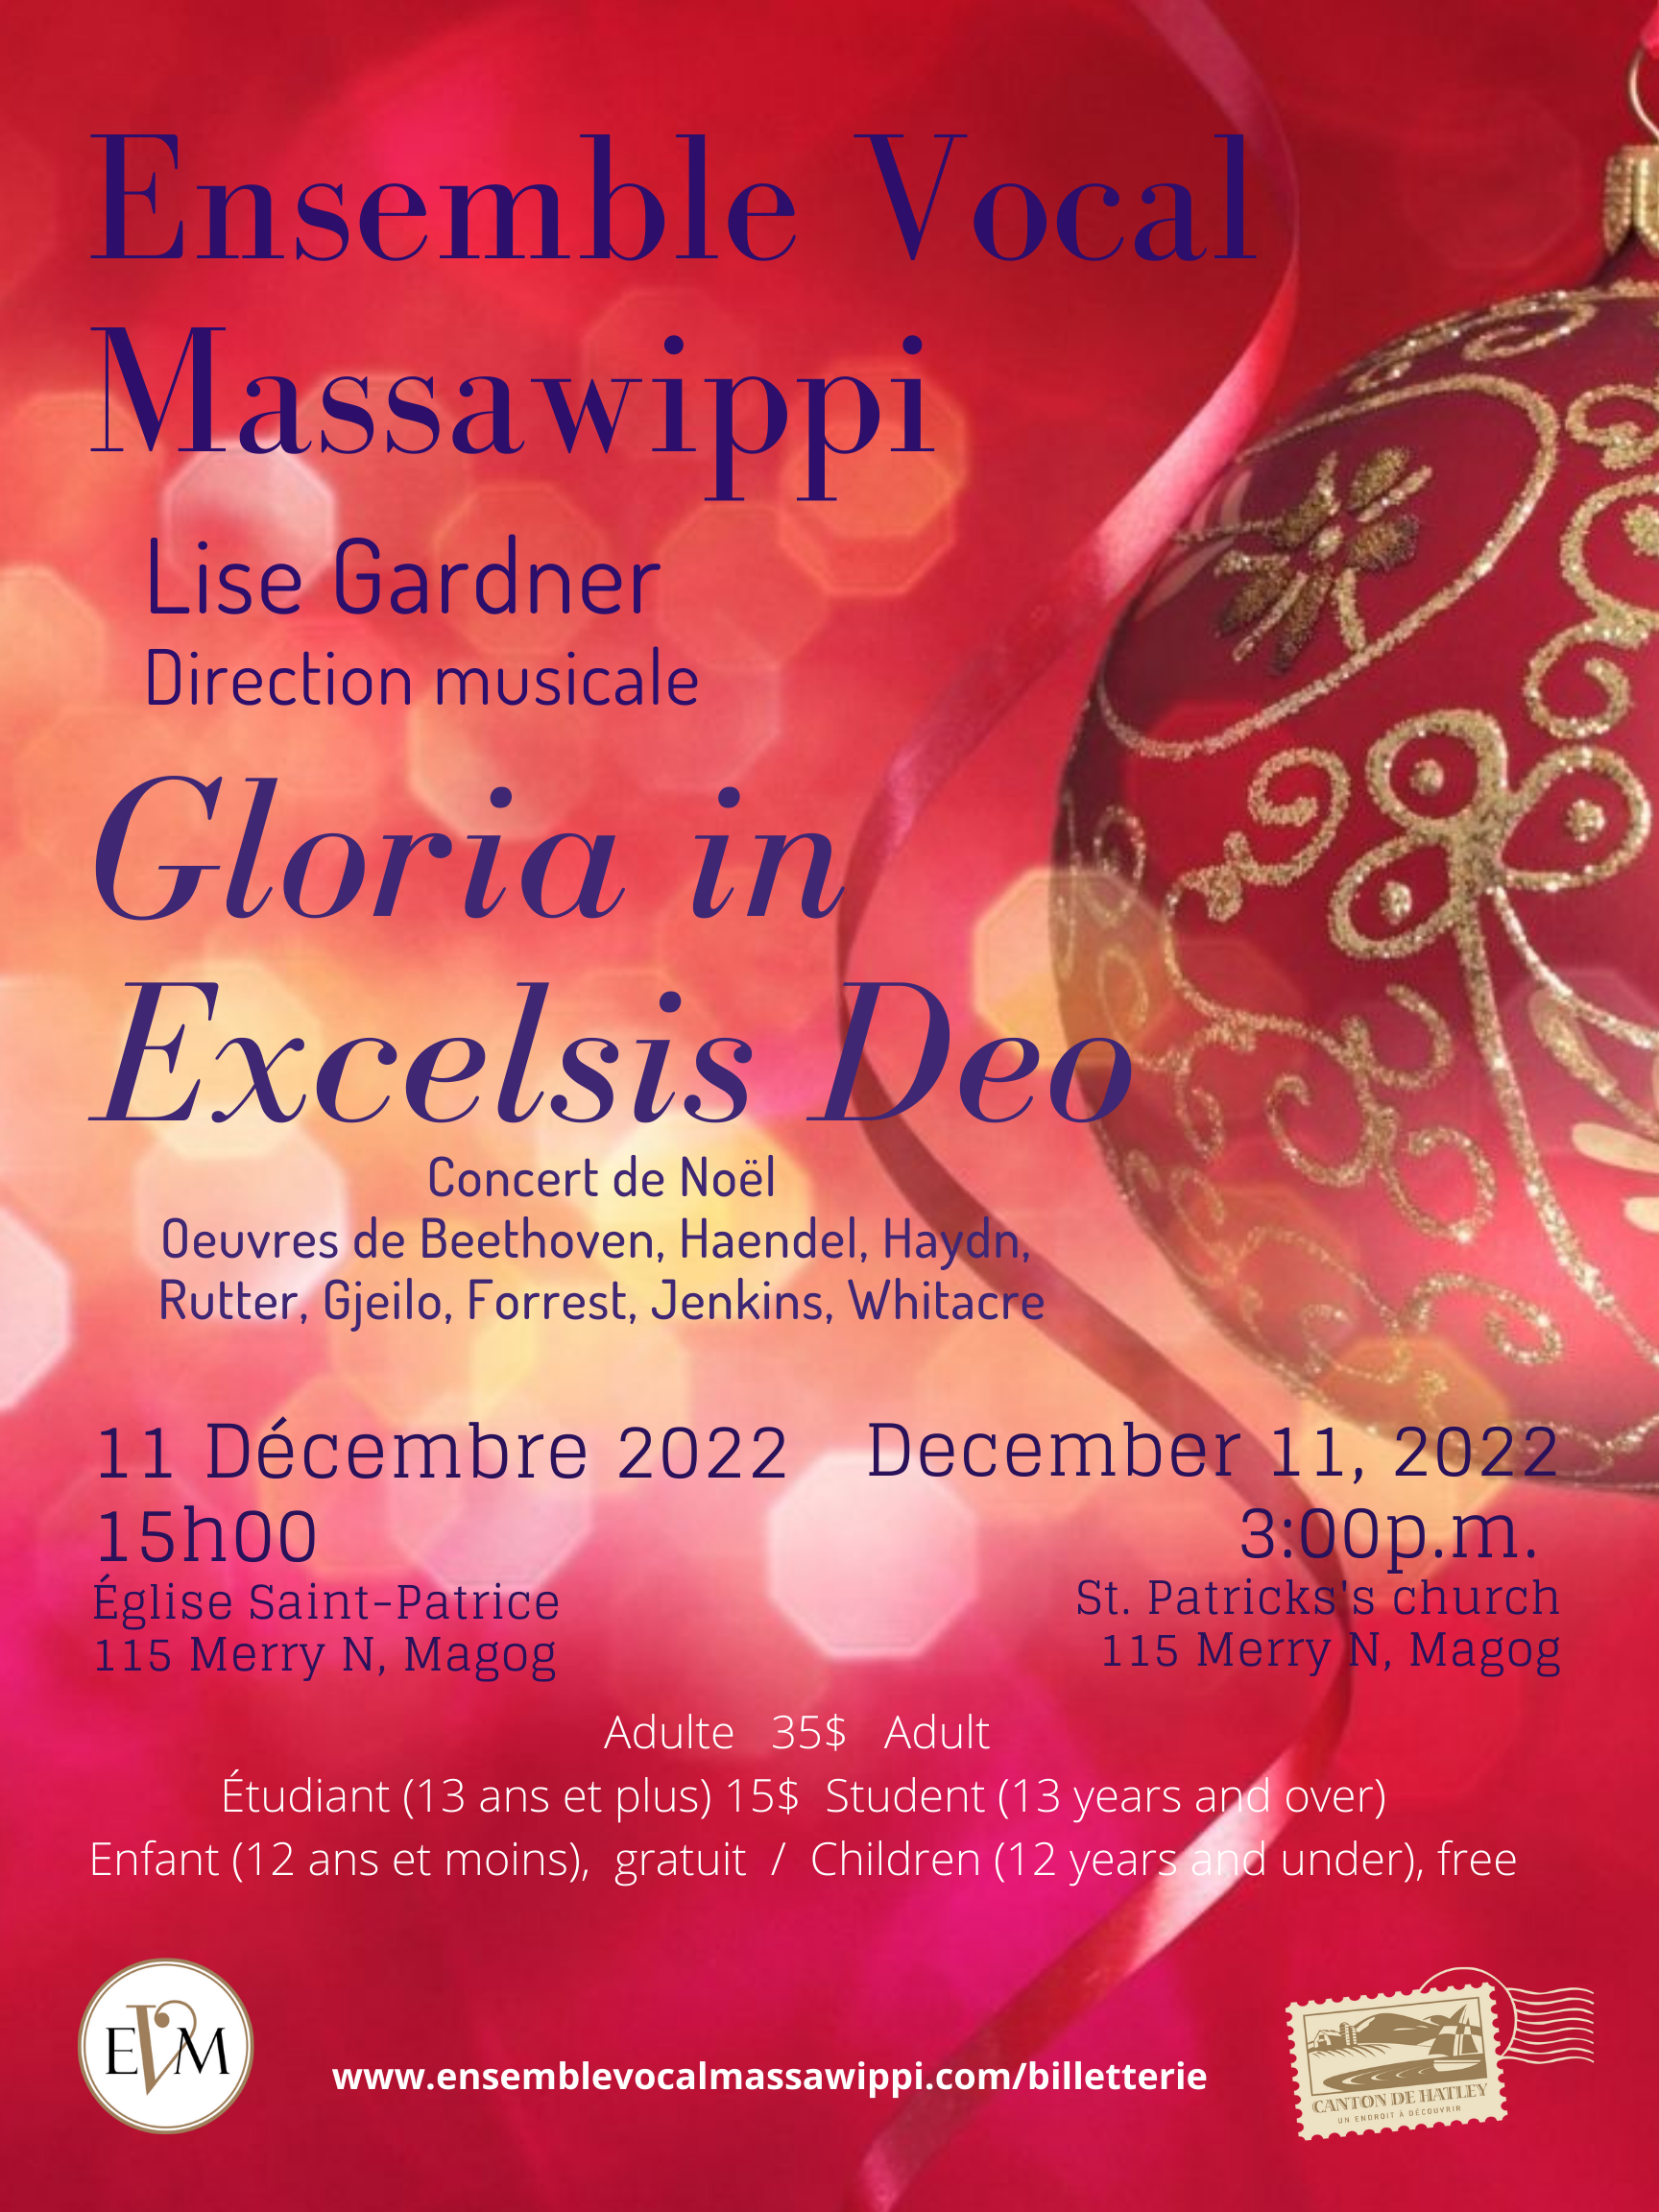 You are currently viewing Christmas concert by the Ensemble Vocal Massawippi